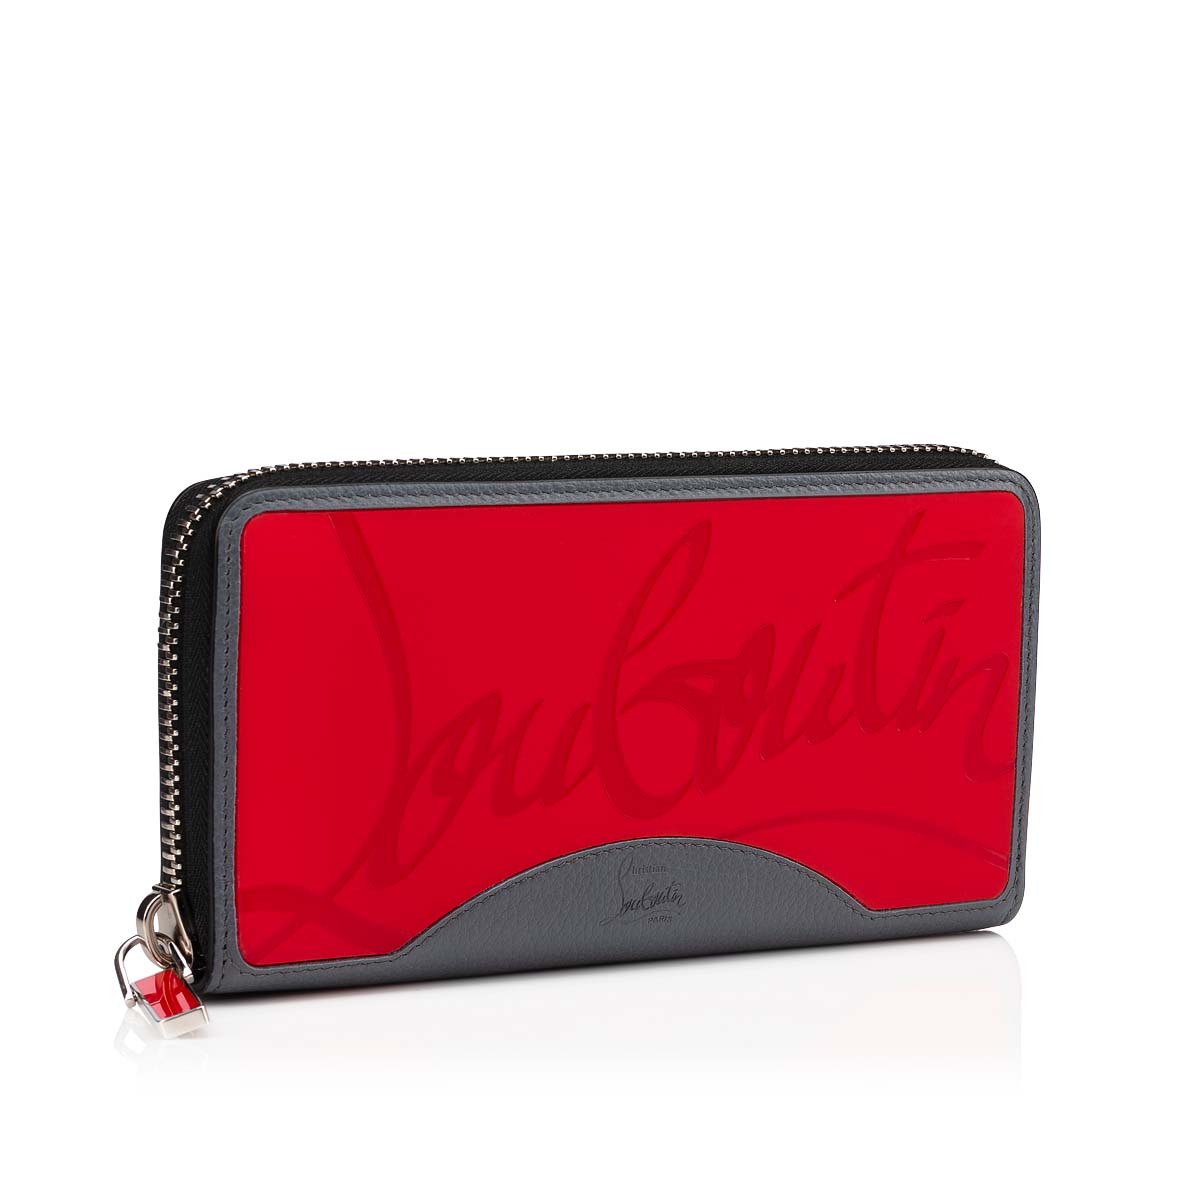 CHRISTIAN LOUBOUTIN Panettone Kraft printed leather continental wallet